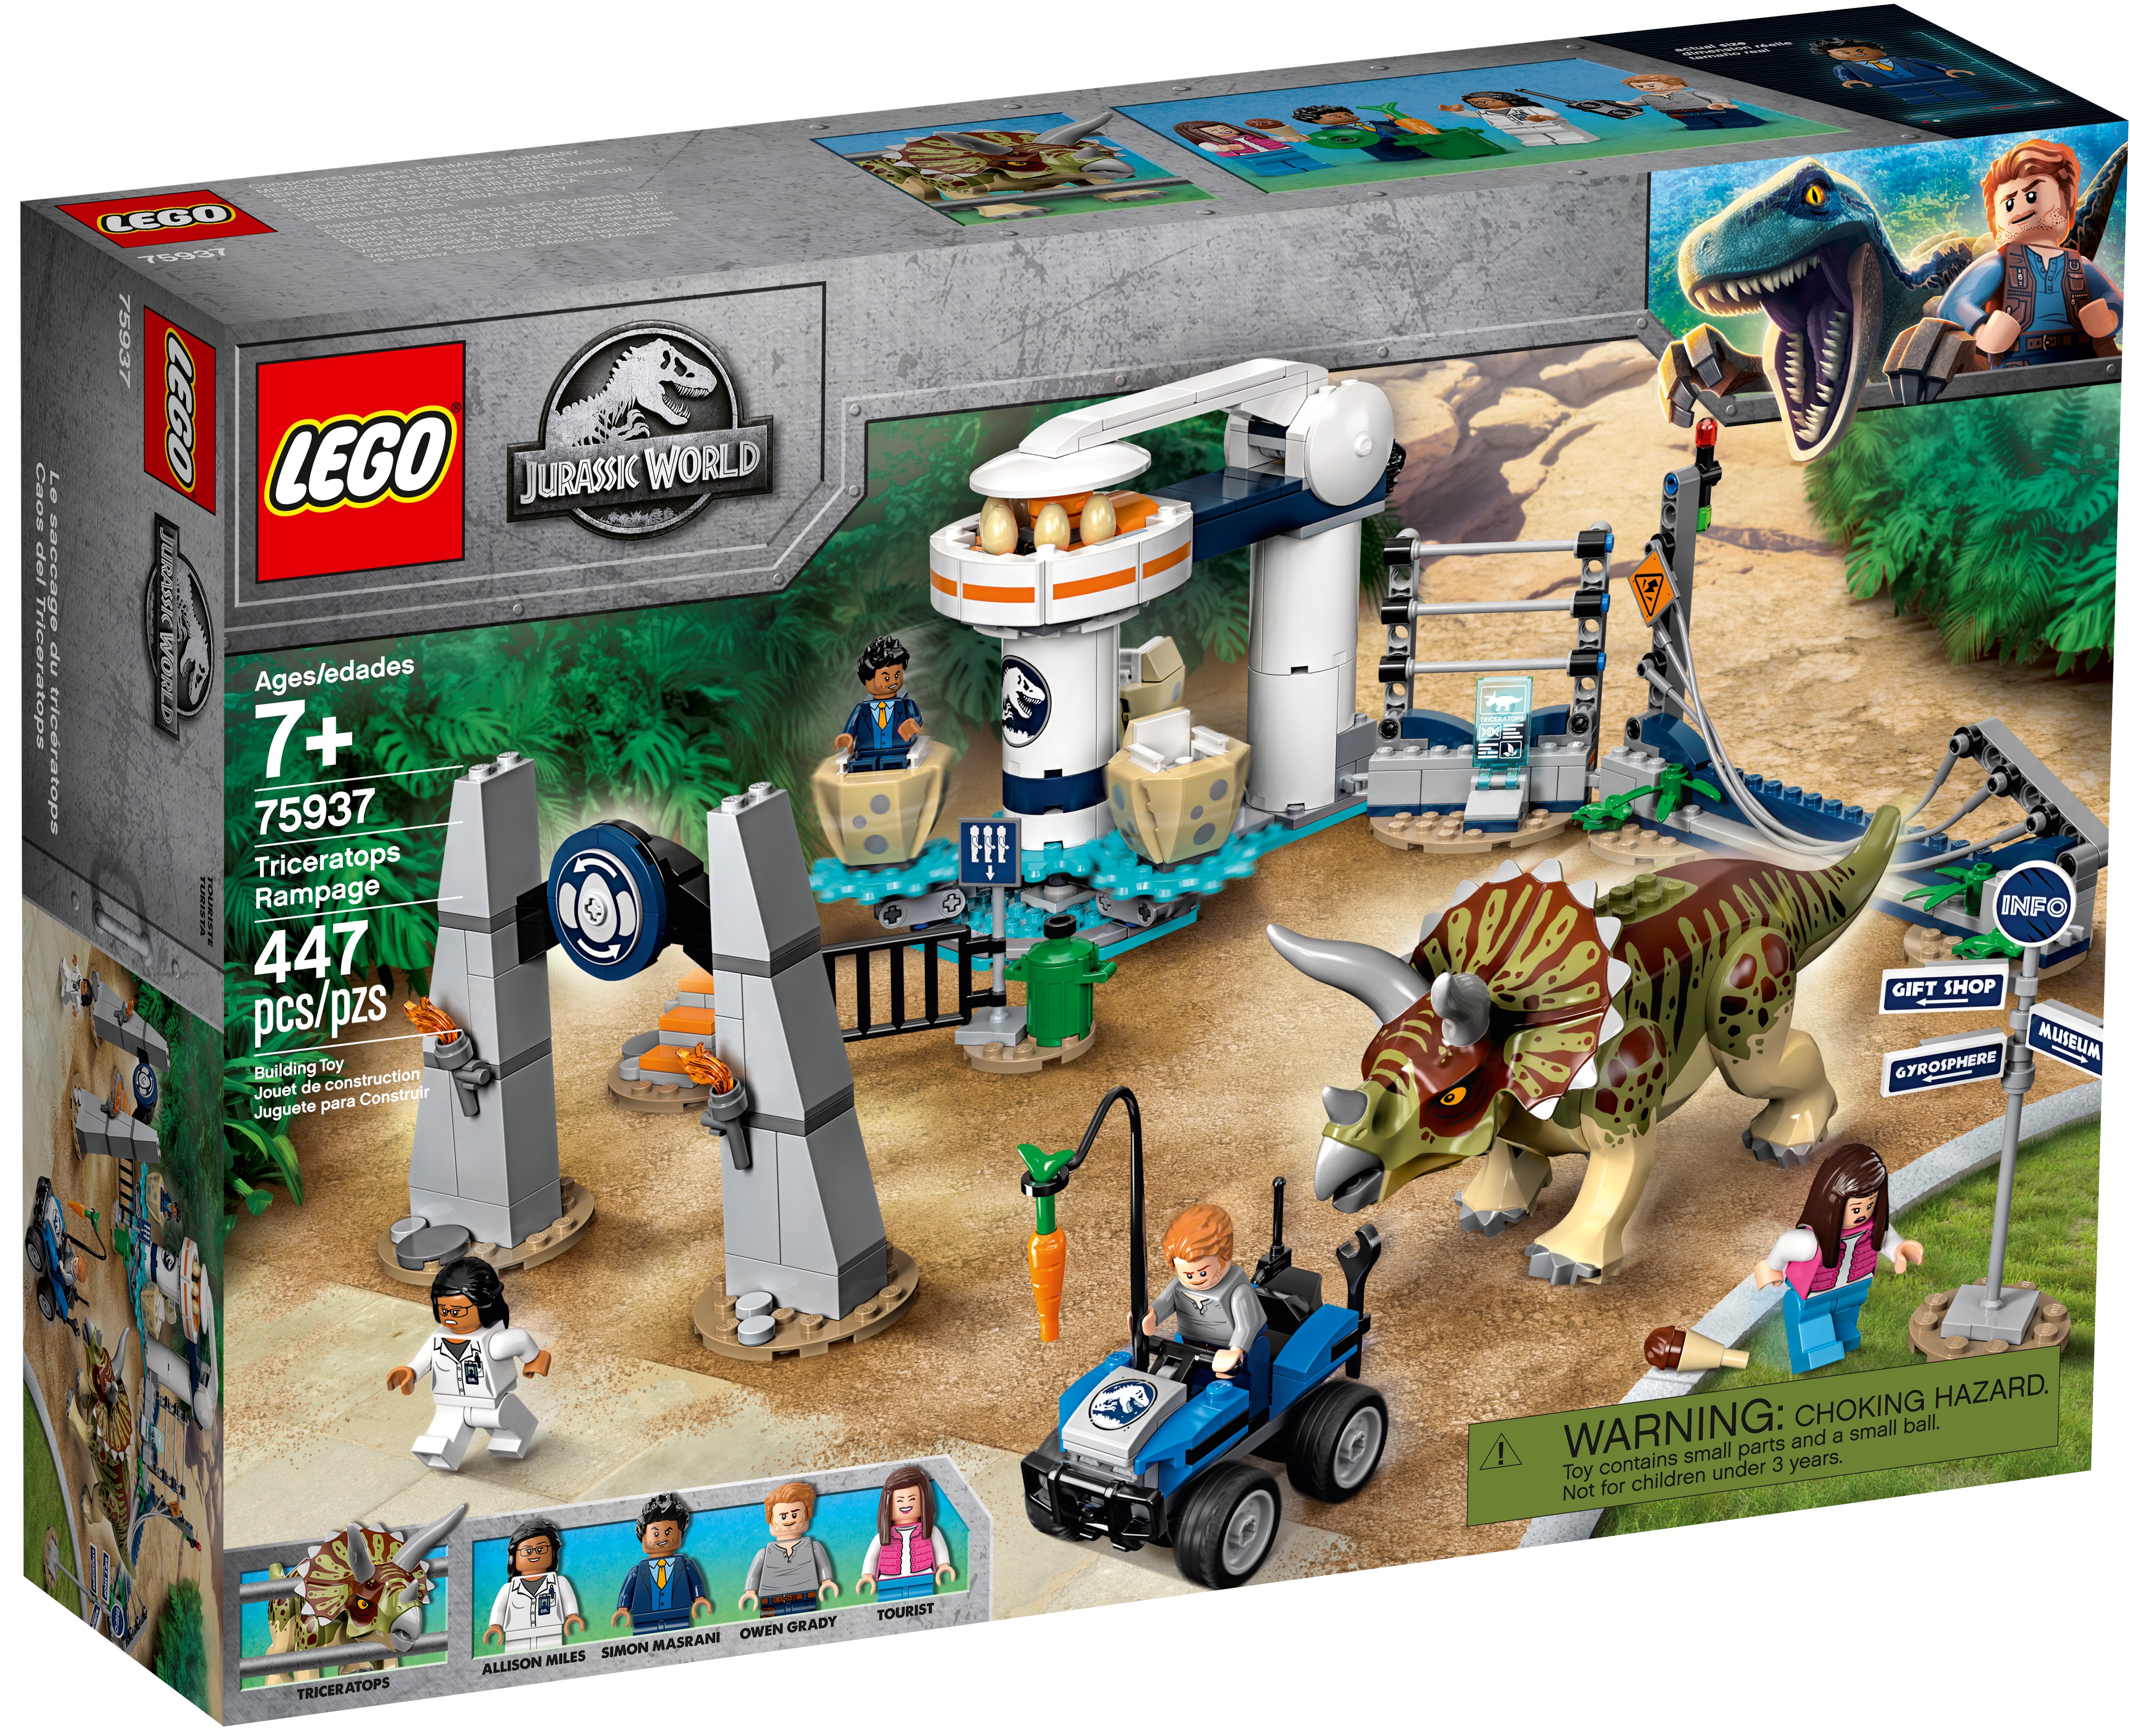 Lego Jurassic World 75937 Triceratops Rampage Dinosaure 2019 for sale online 